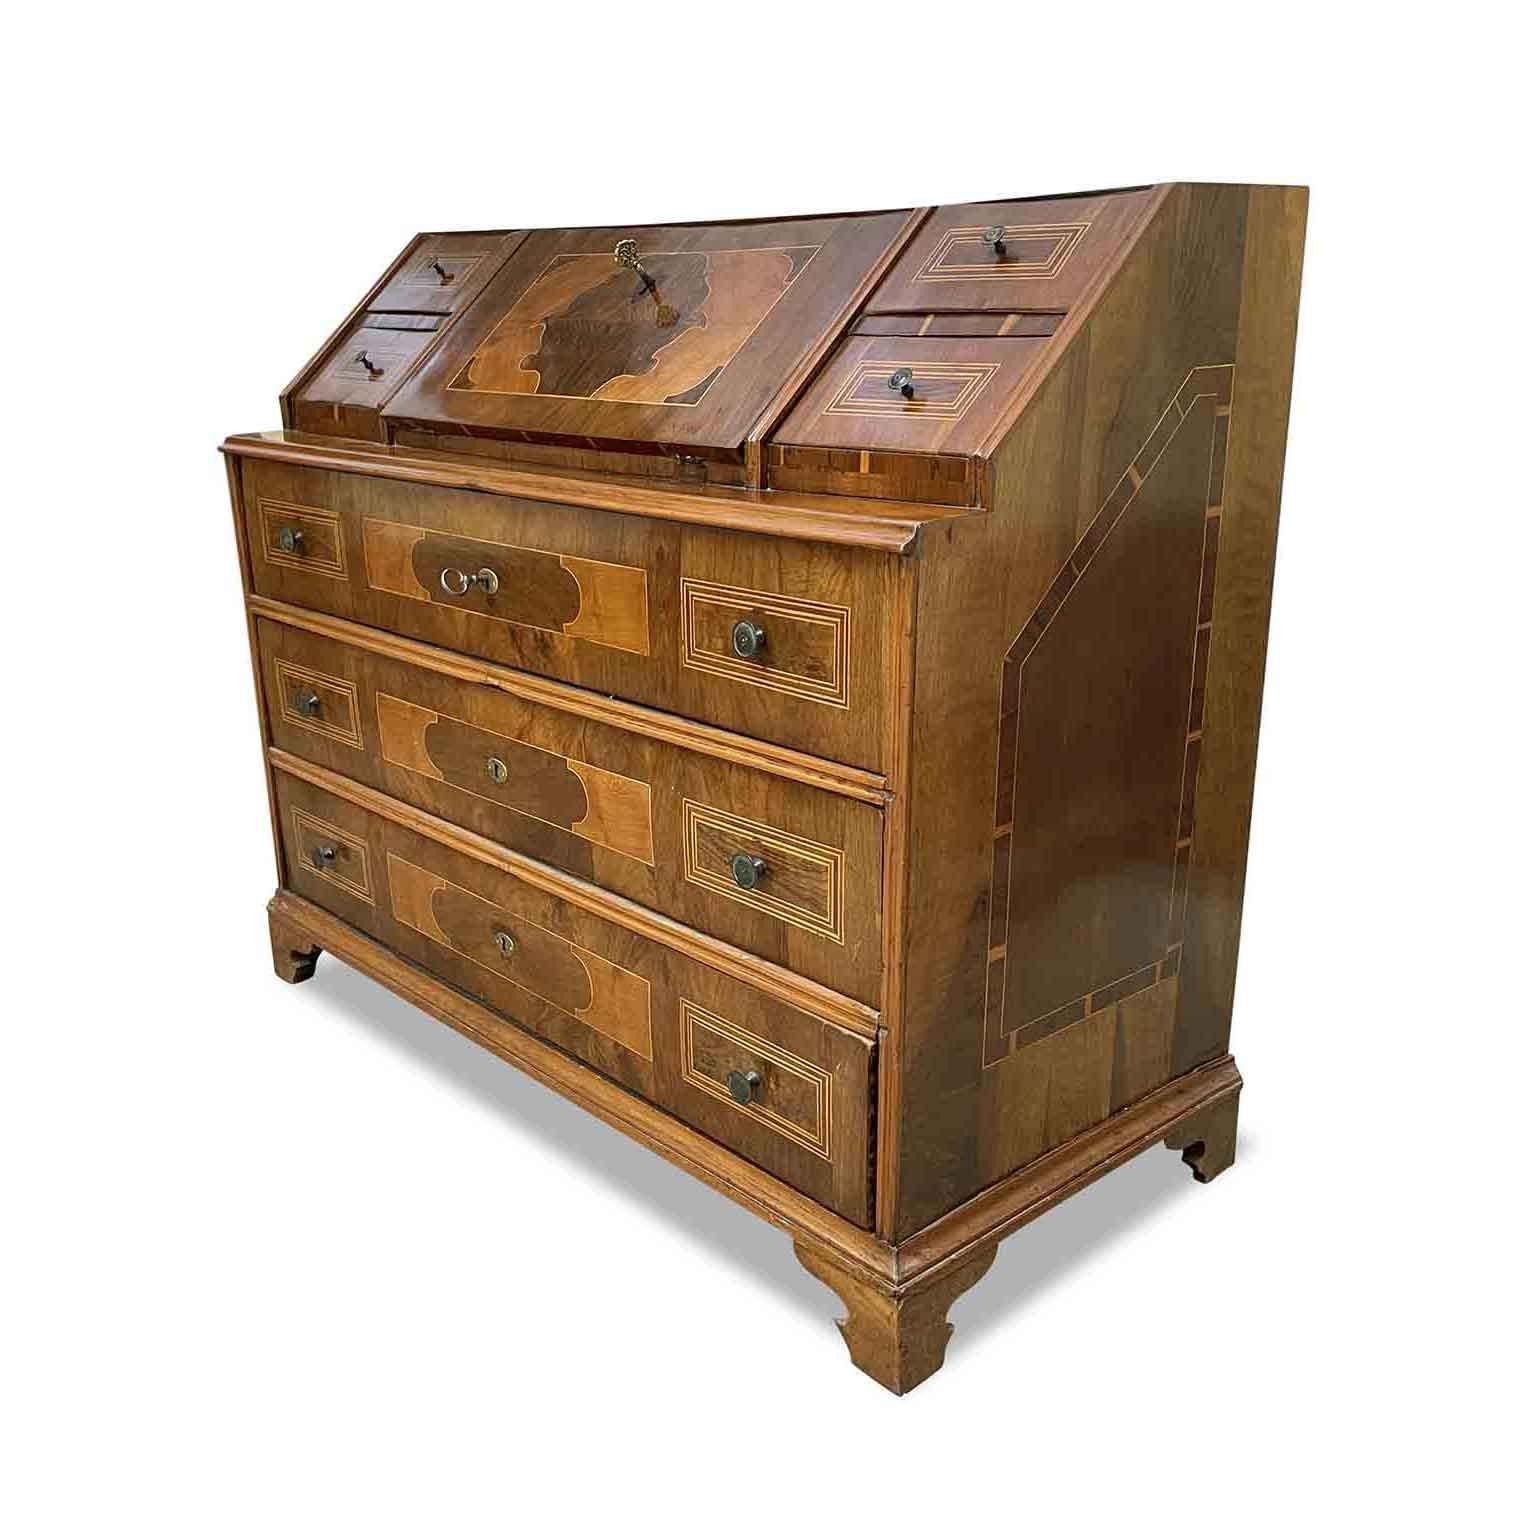 A mid-18th century chest of drawers with flap a large Italian bureau with flap coming from a private collection of Milan but of Trentino origin, a Northern Italian region closed to Austrian mountain border.
This Italian walnut bureau with flap dates